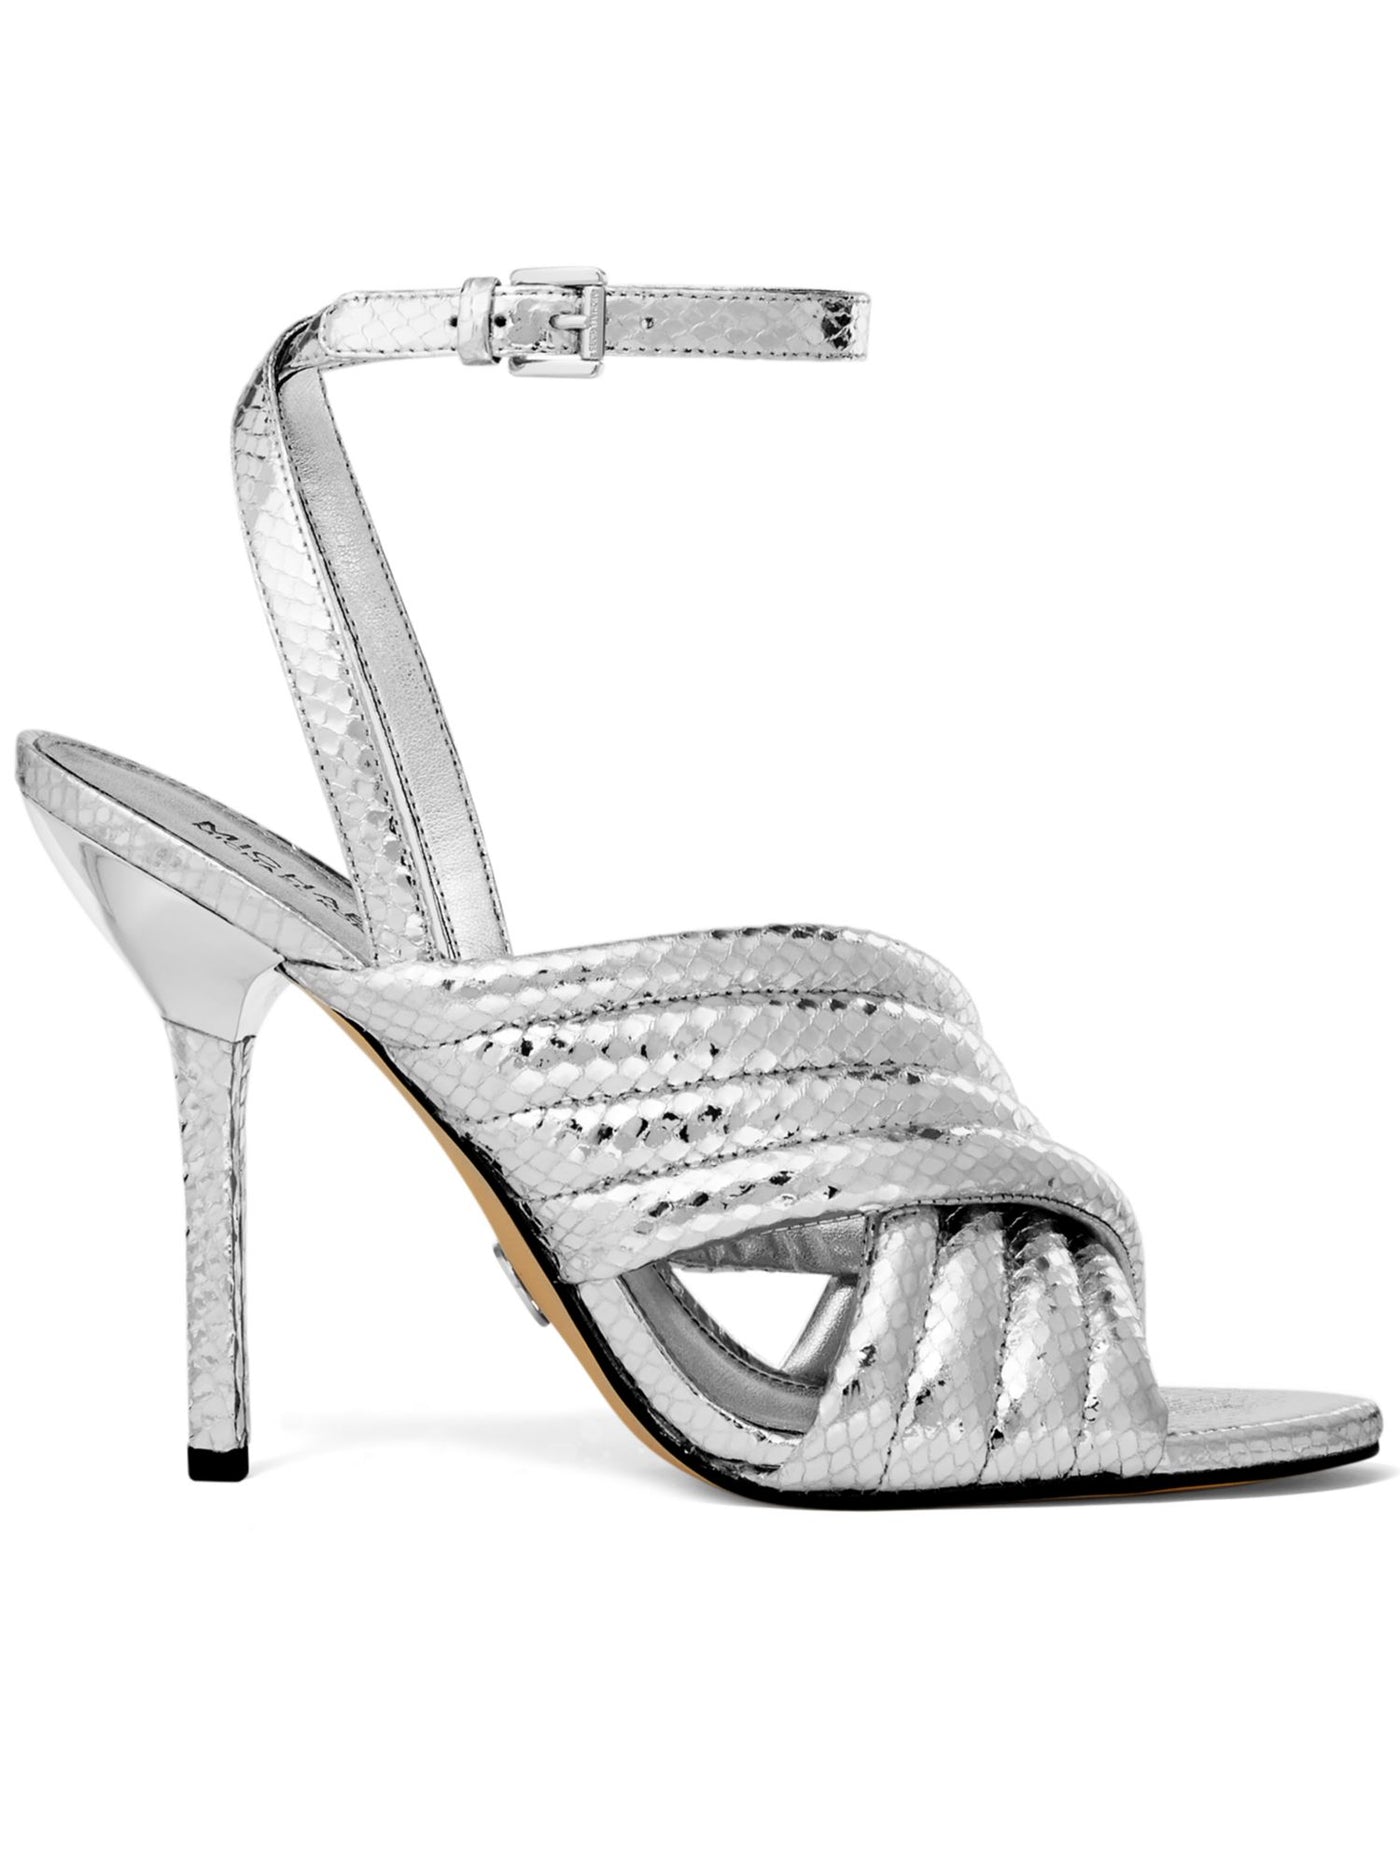 MICHAEL KORS Womens Silver Scale Embossed Metallic Ankle Strap Padded Royce Round Toe Stiletto Buckle Leather Dress Sandals Shoes 7 M